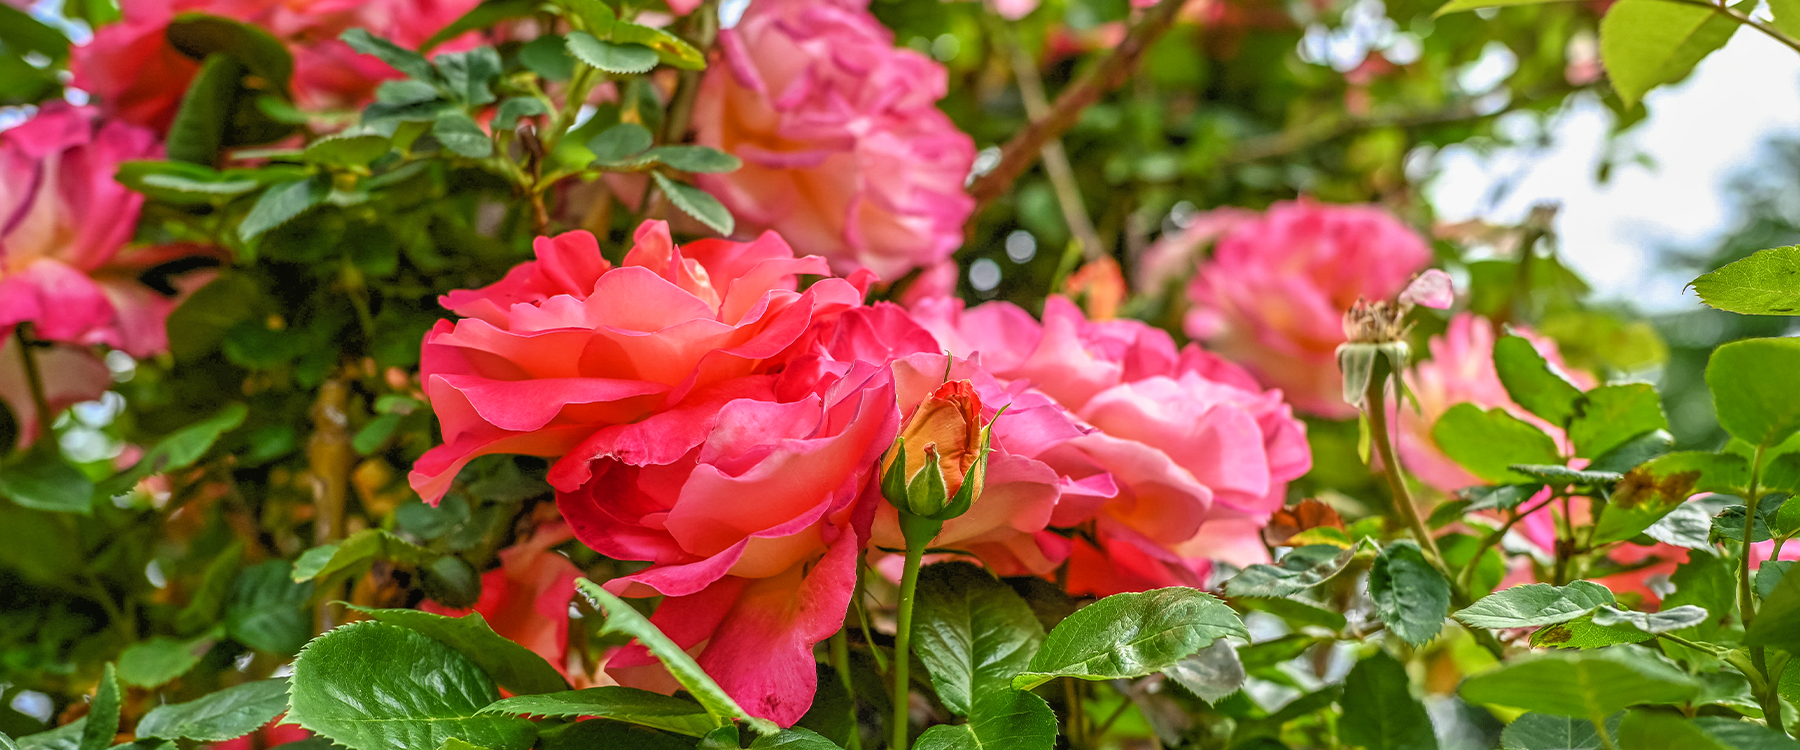 8 Steps To Pruning Your Roses For More Blooms This Summer